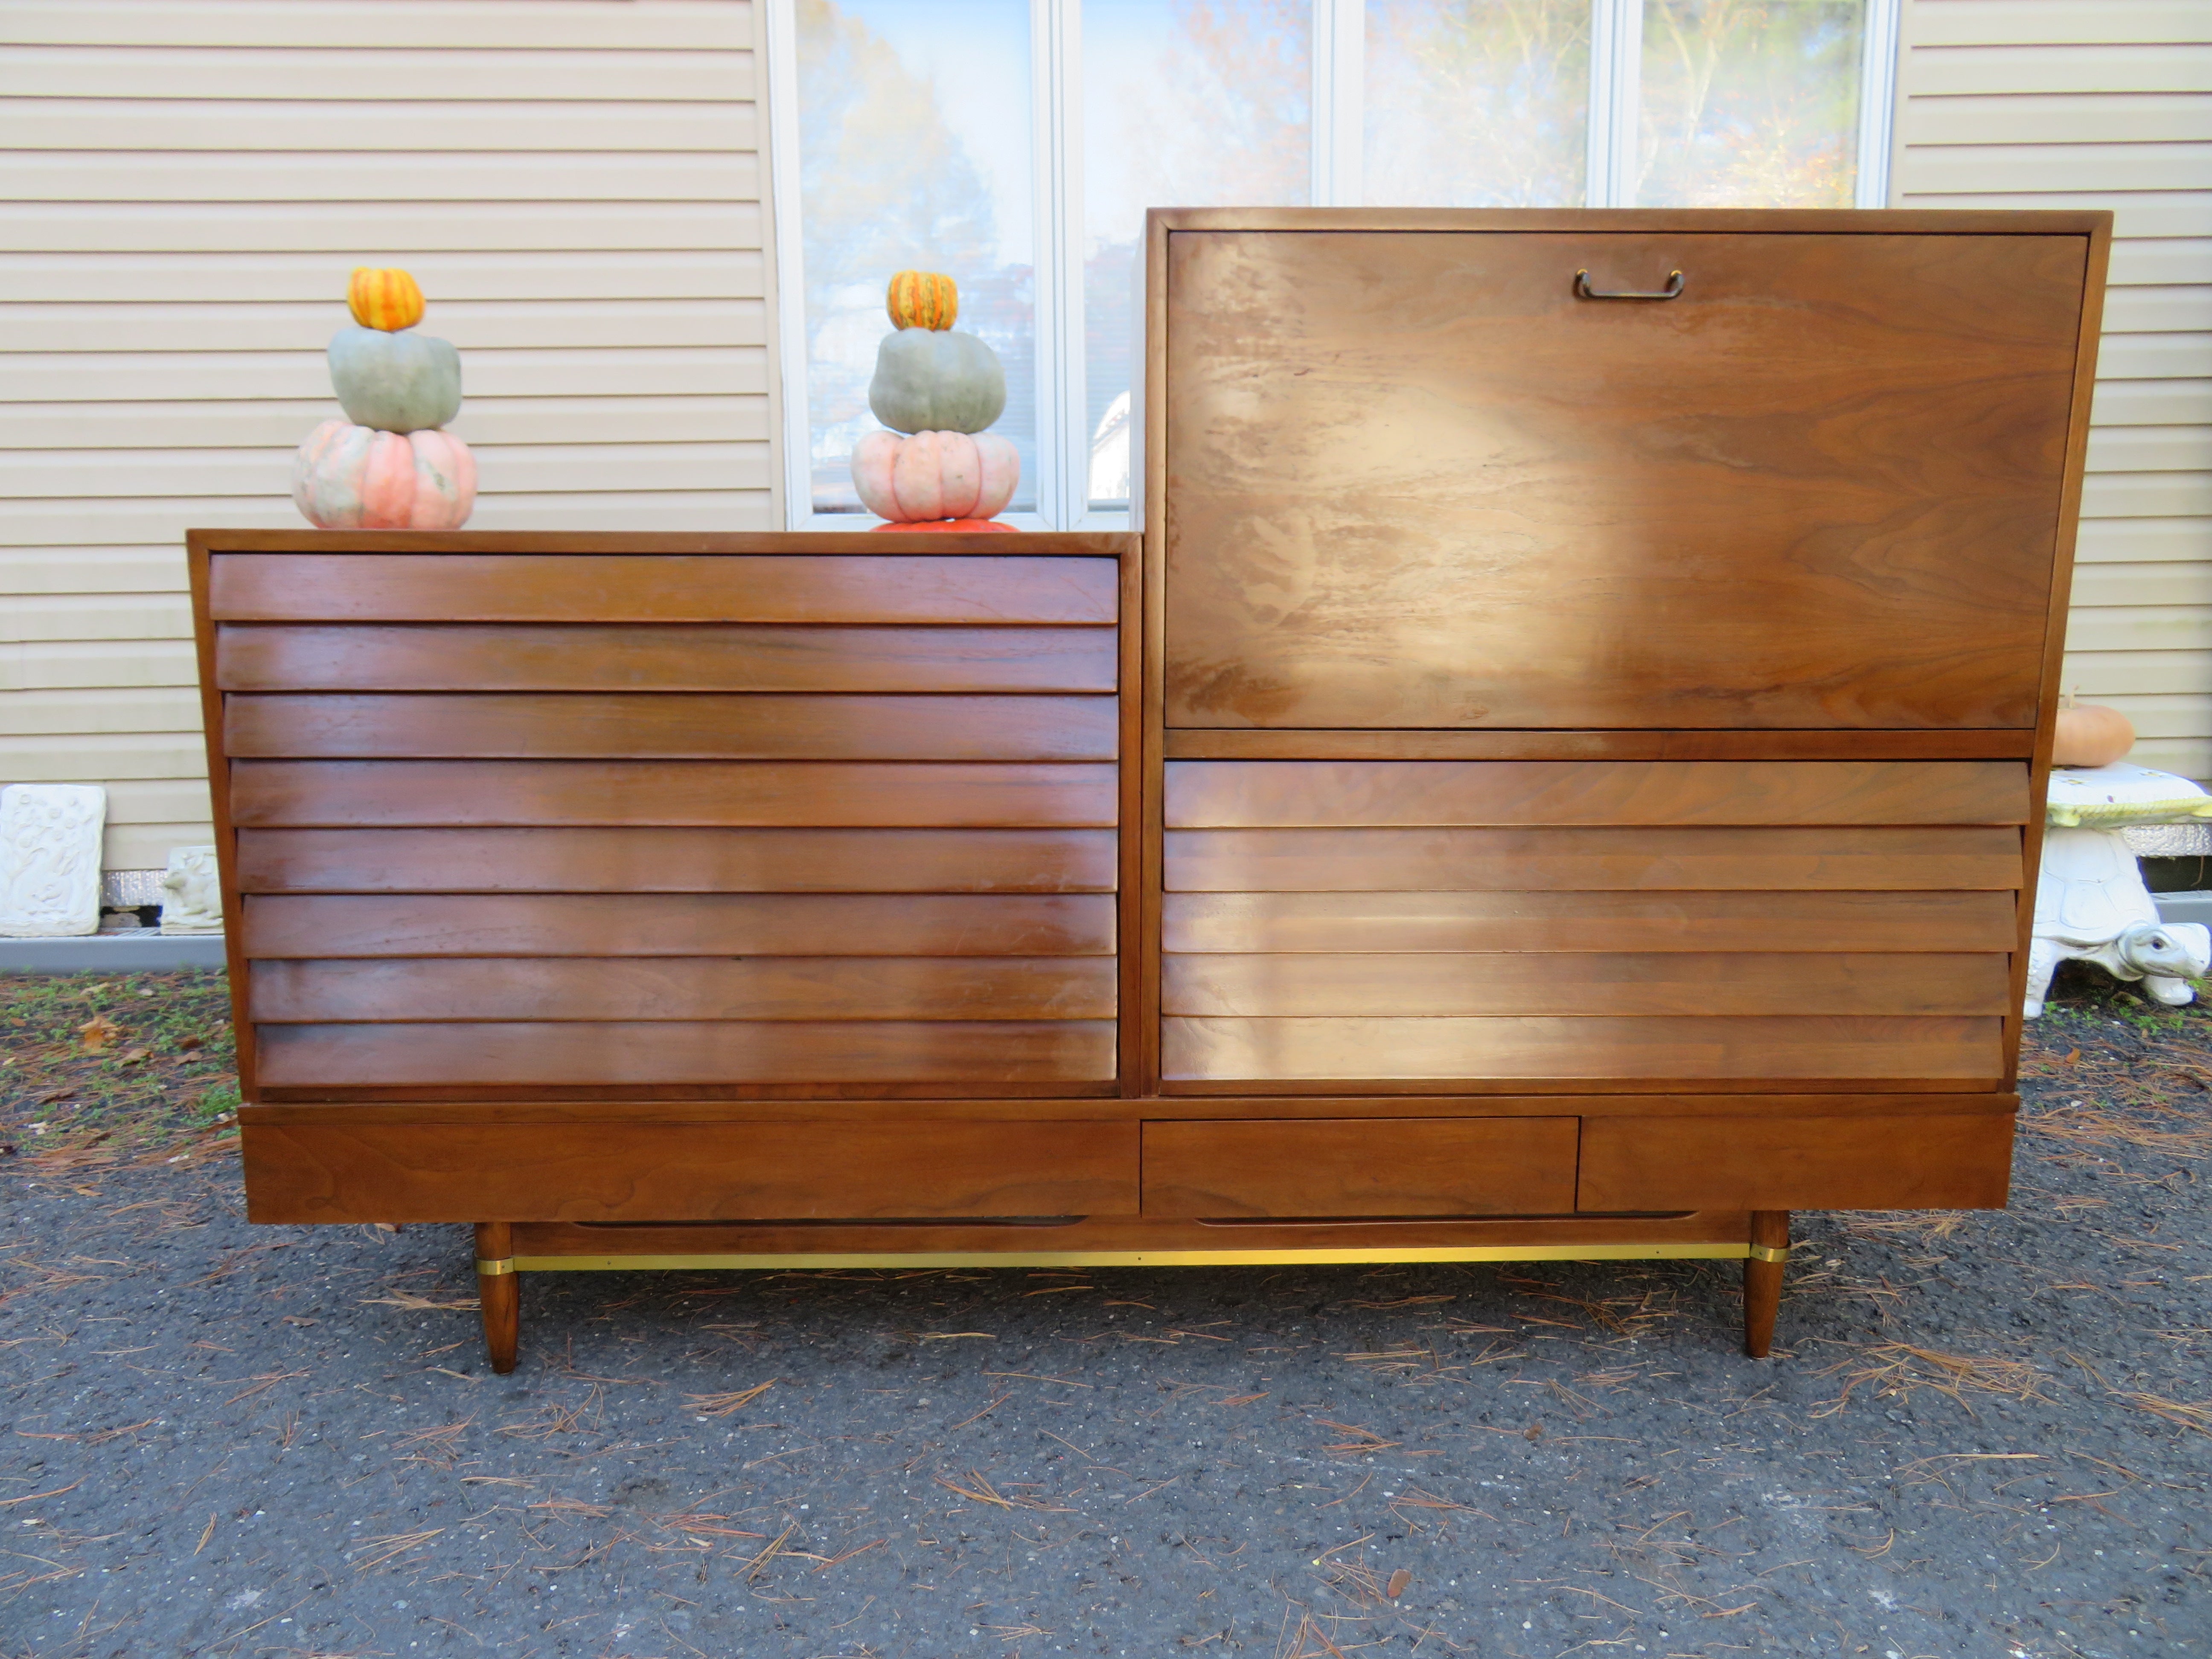 Mid-Century Modern walnut low bench with modular desk and drawer cabinet designed by Merton Gerhsun for American of Martinsville's Dania line circa 60s. The low bench has three drawers with brass accents on the legs and stretcher. We especially love